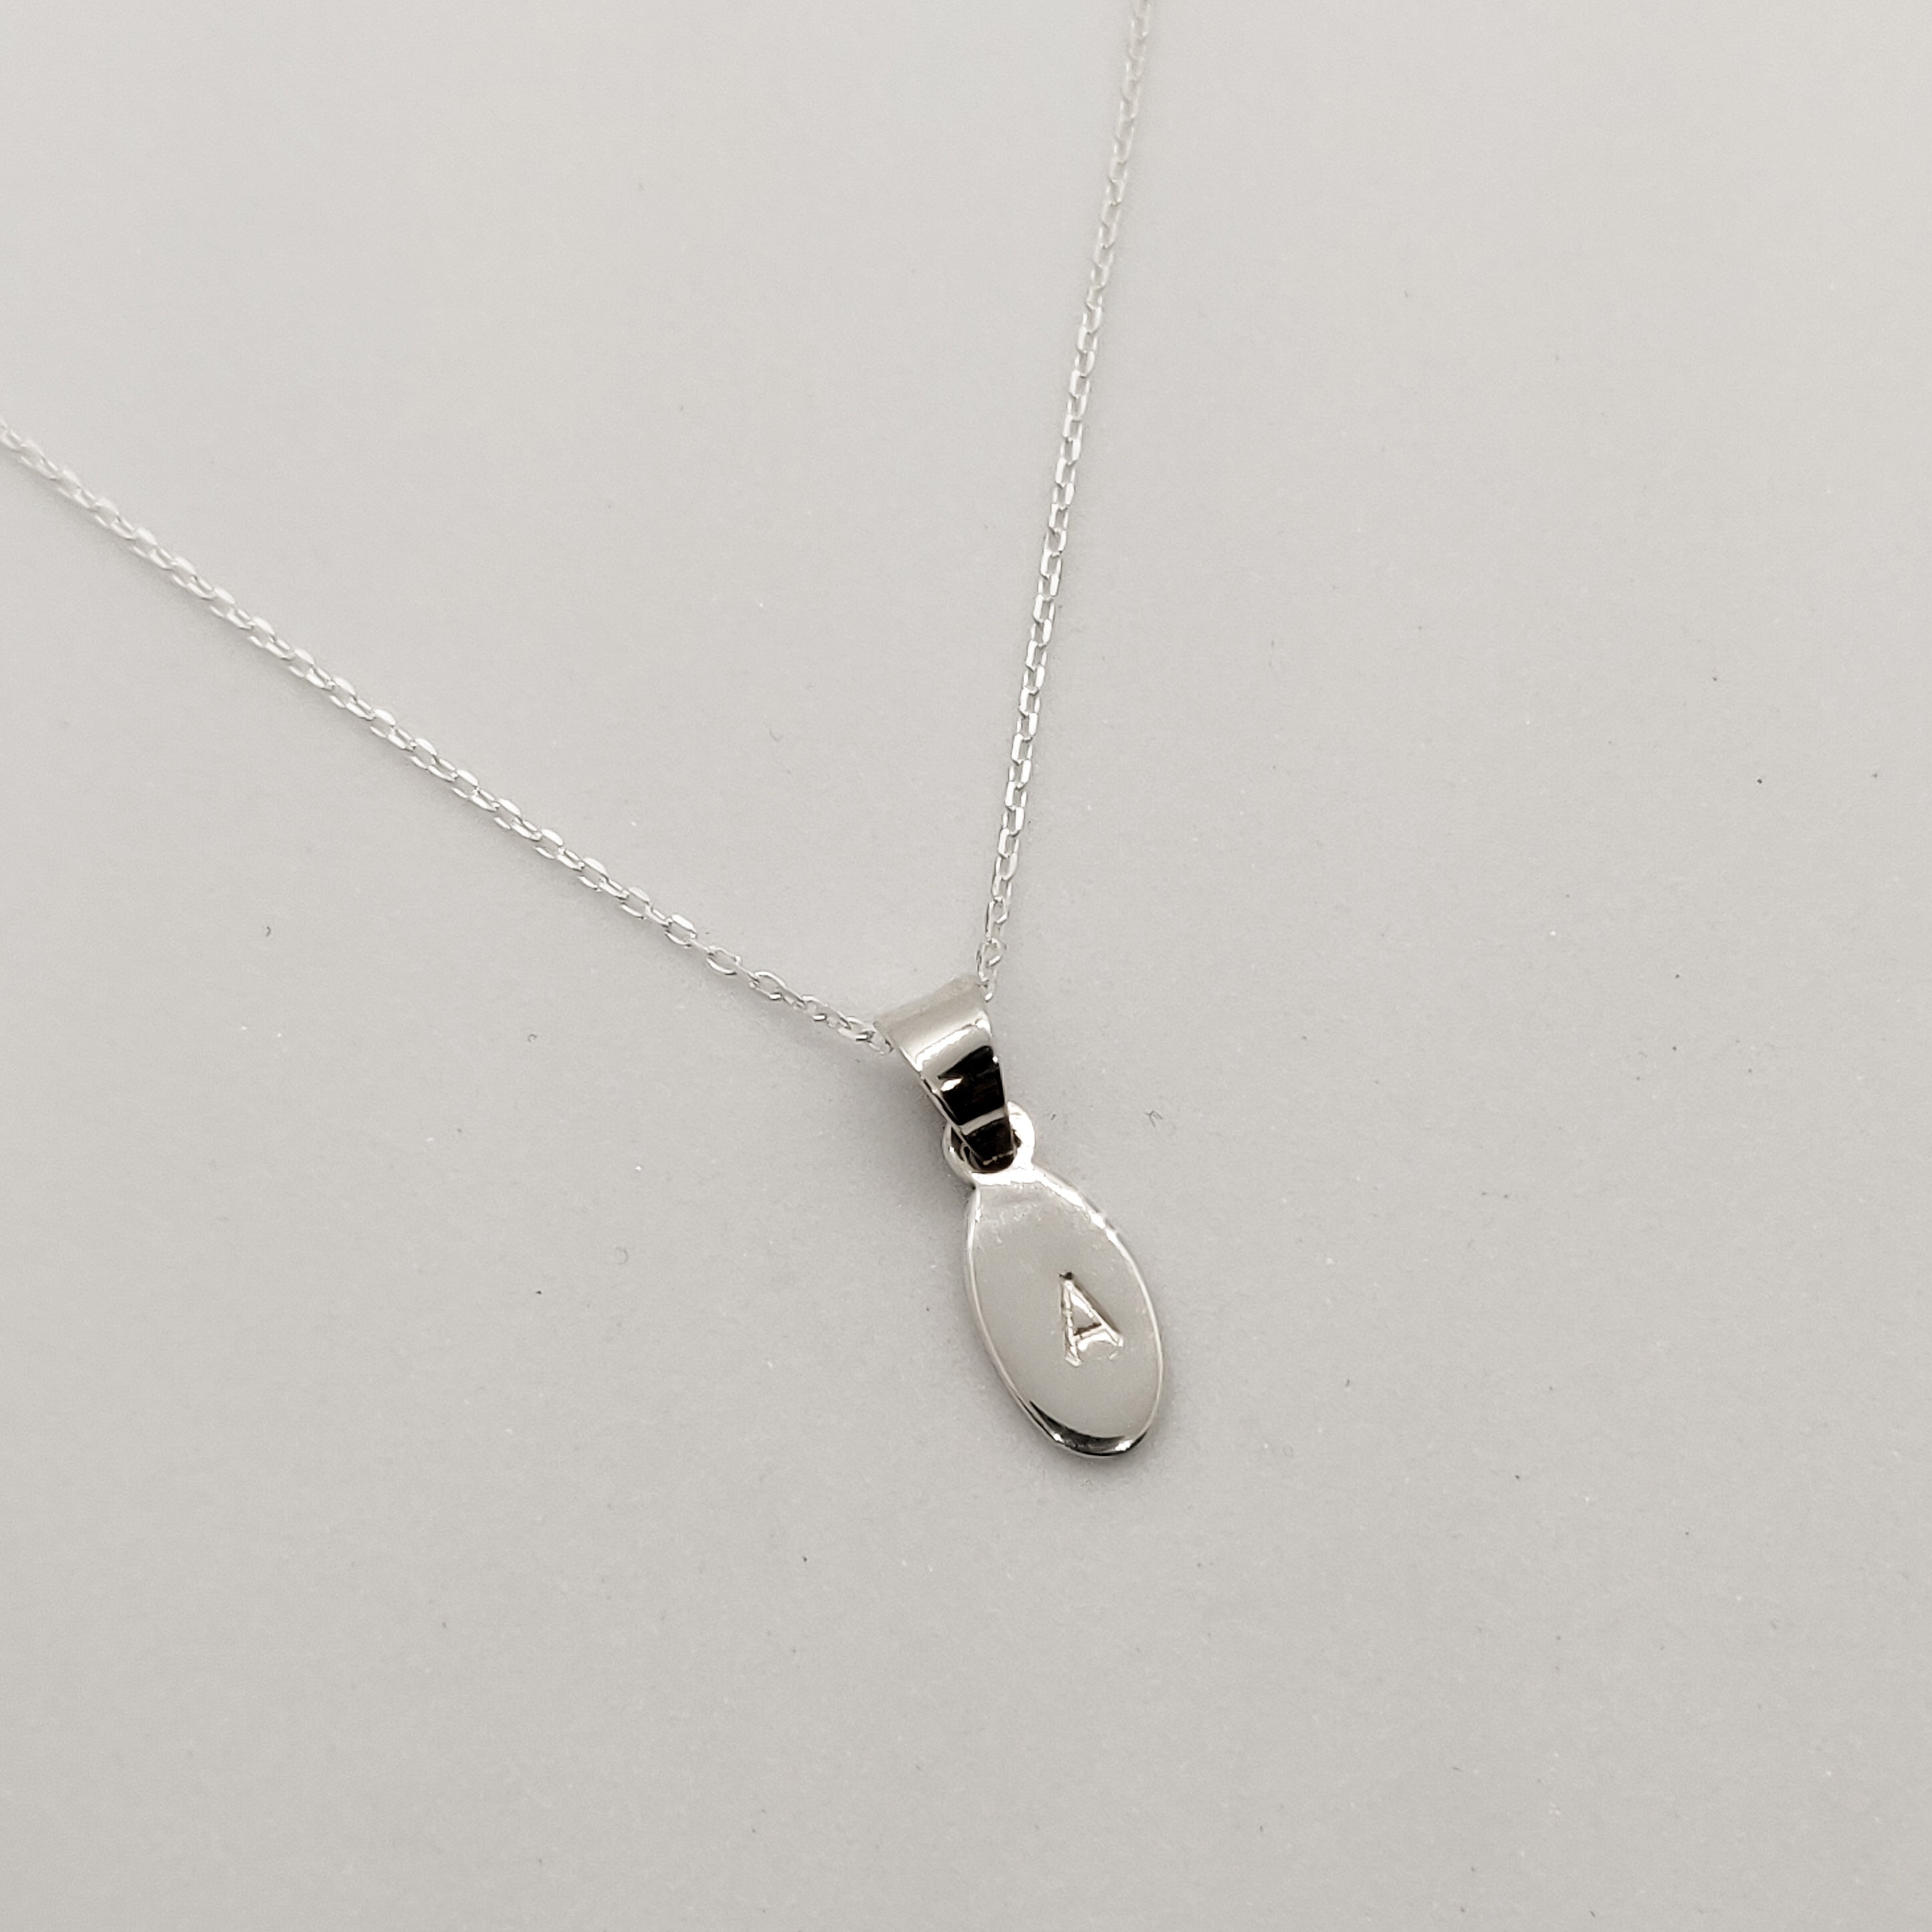 Personalised Silver Drop Pendant Necklace